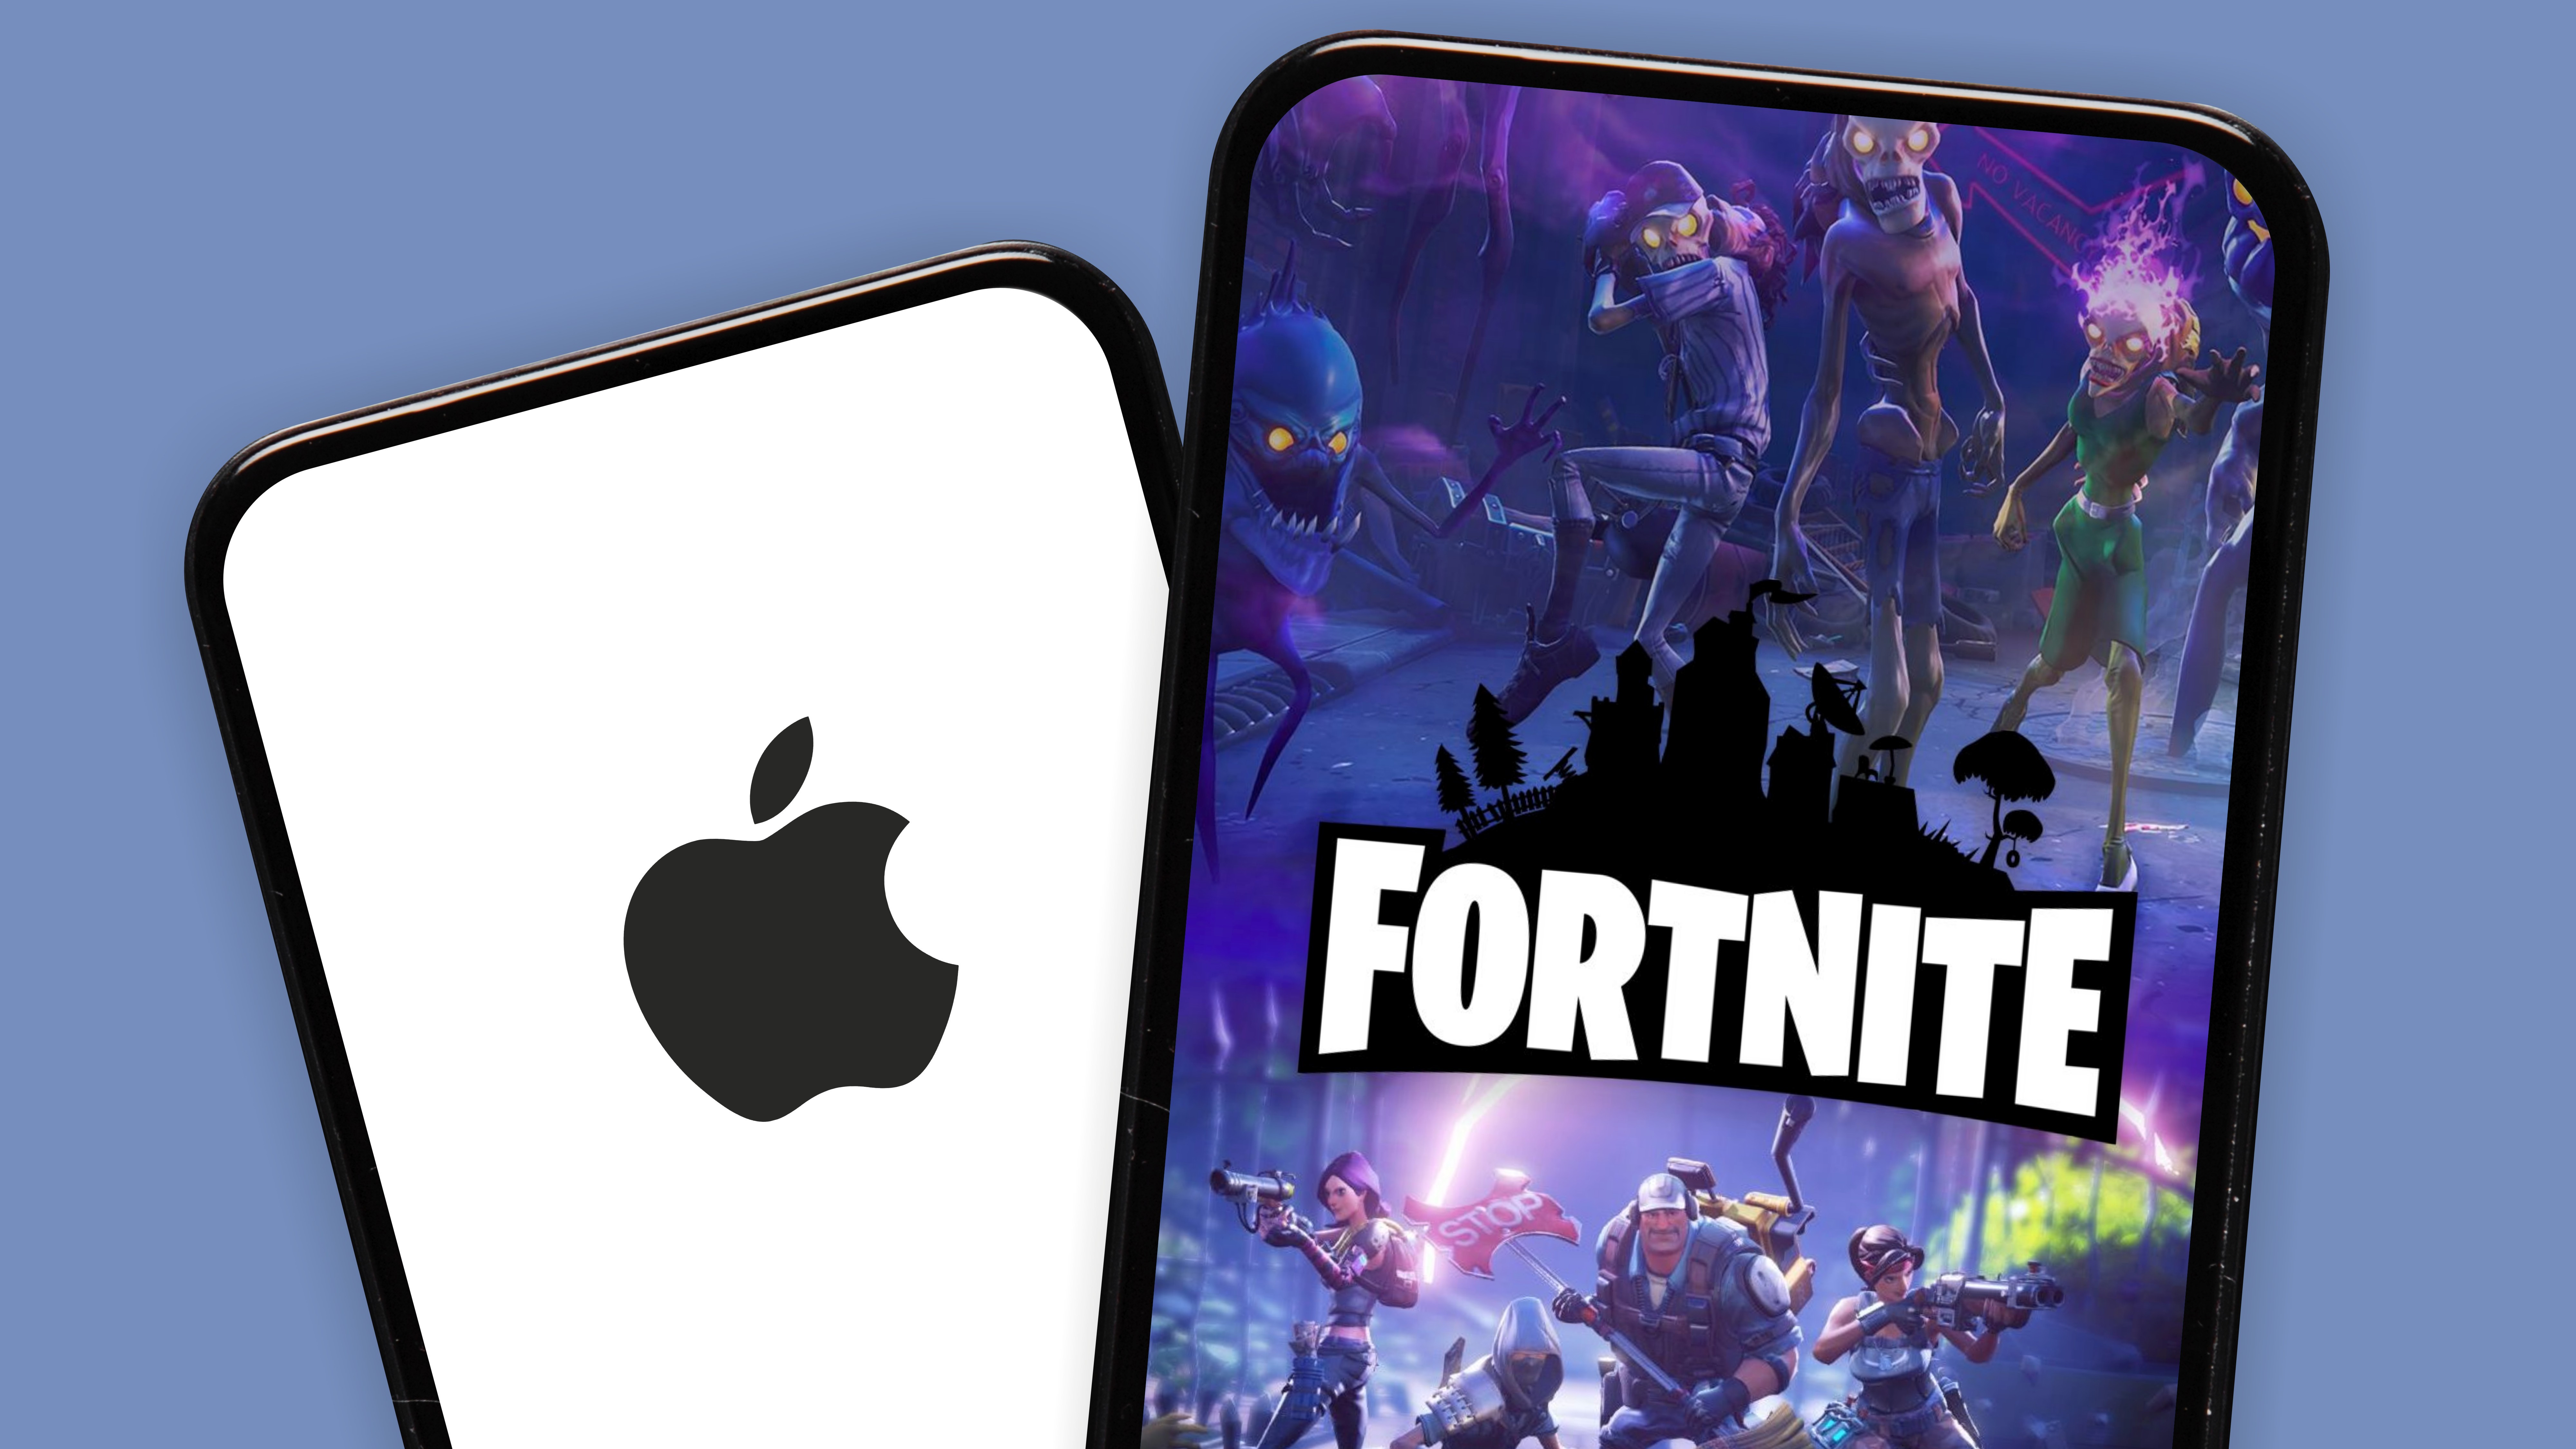 Apple vs Epic Games trial: dates, details and what is